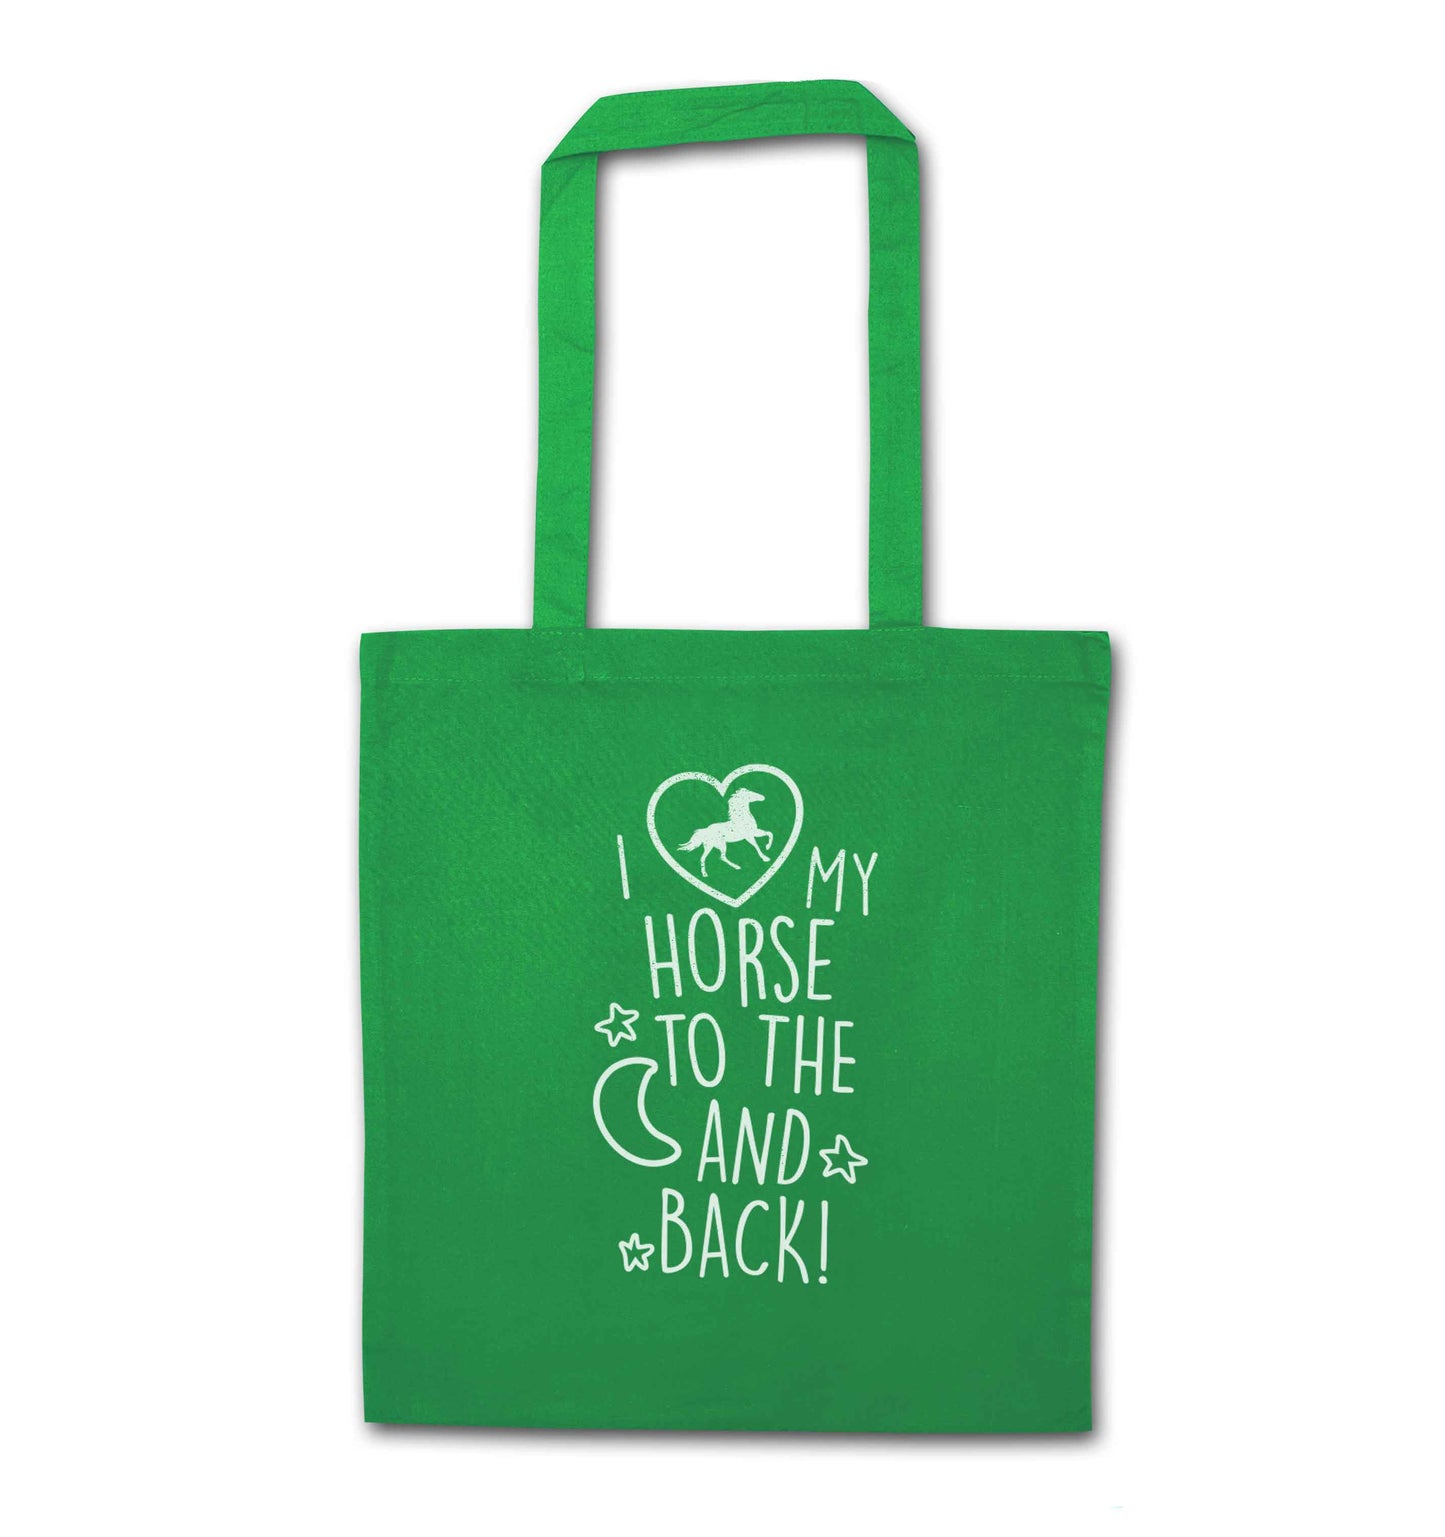 I love my horse to the moon and back green tote bag